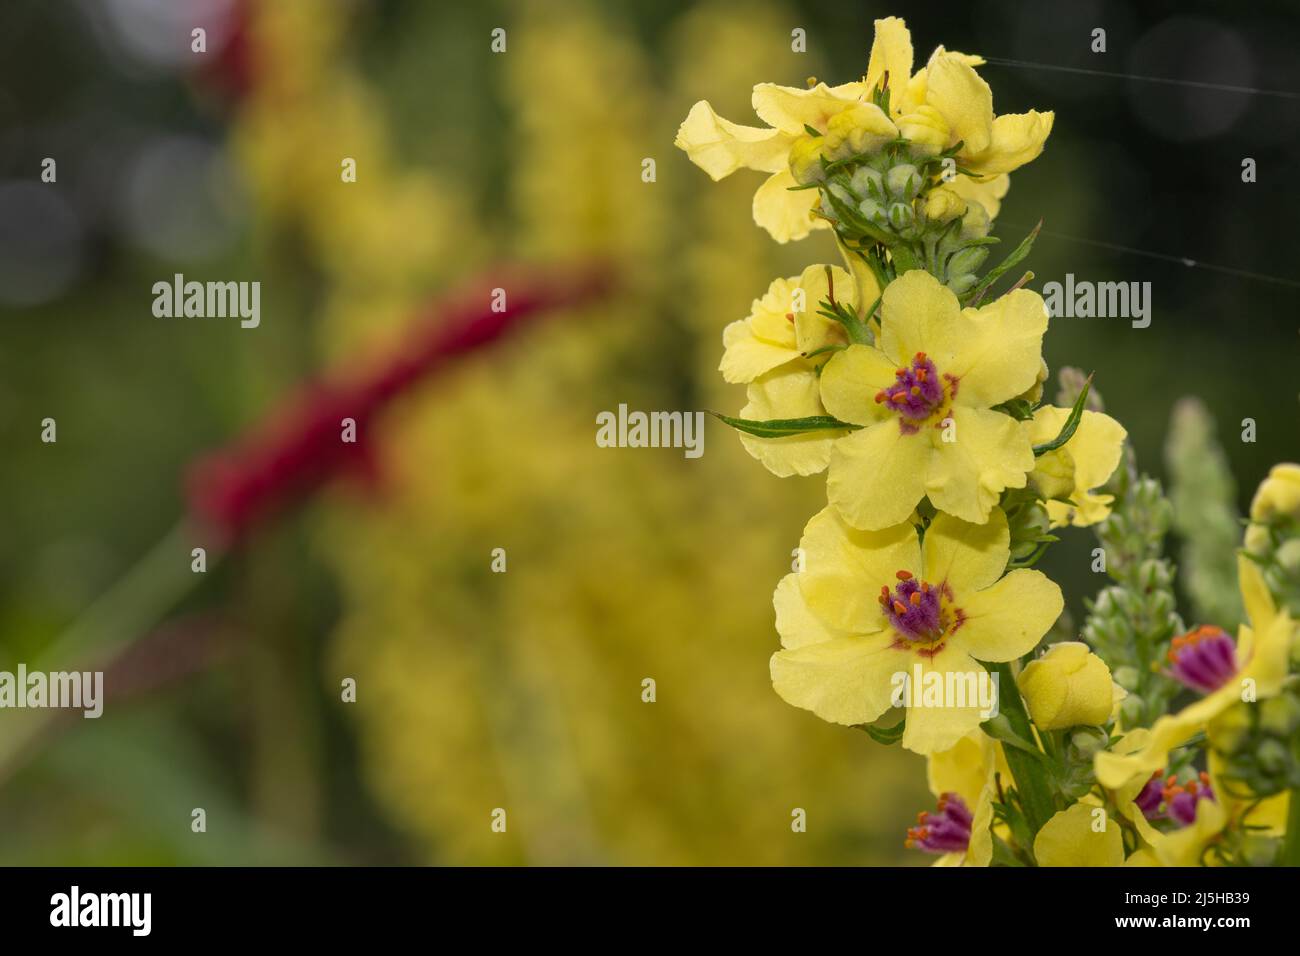 Close up of a verbascum chaixii flower in bloom Stock Photo